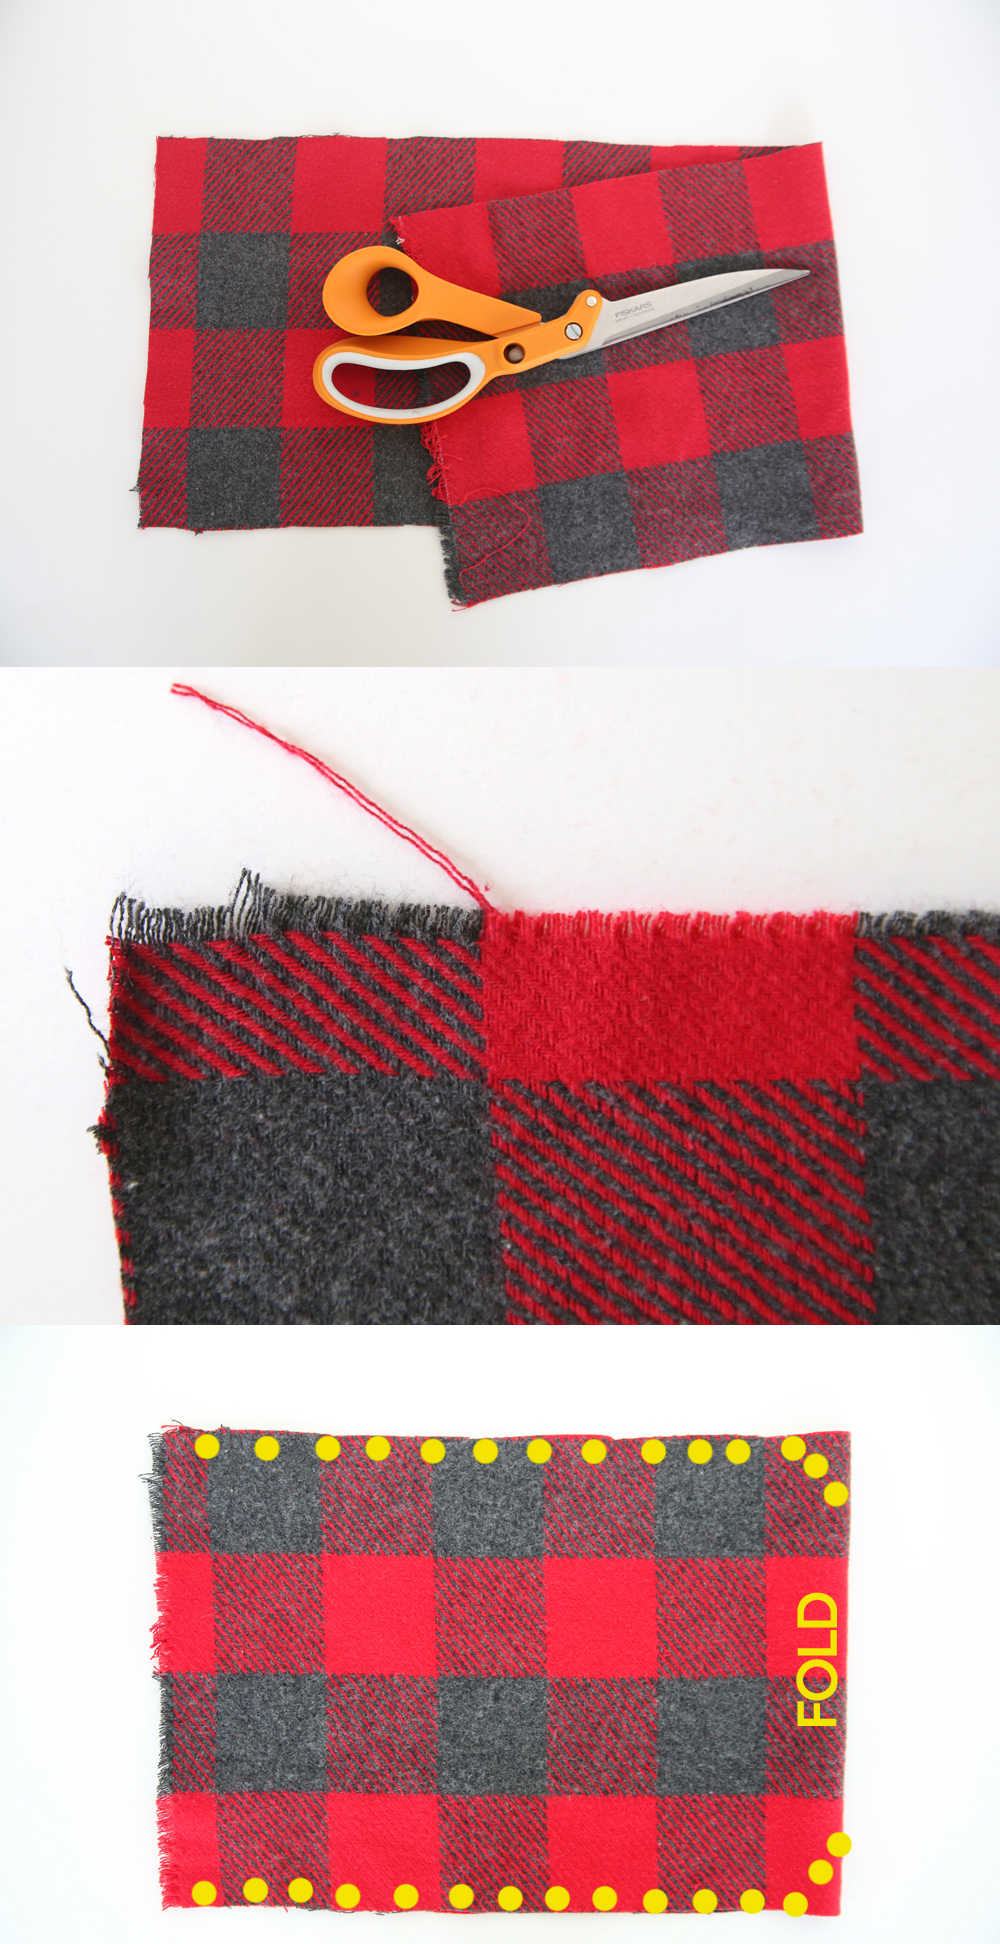 Plaid flannel fabric strip folded in half, with seams marked to create a sack